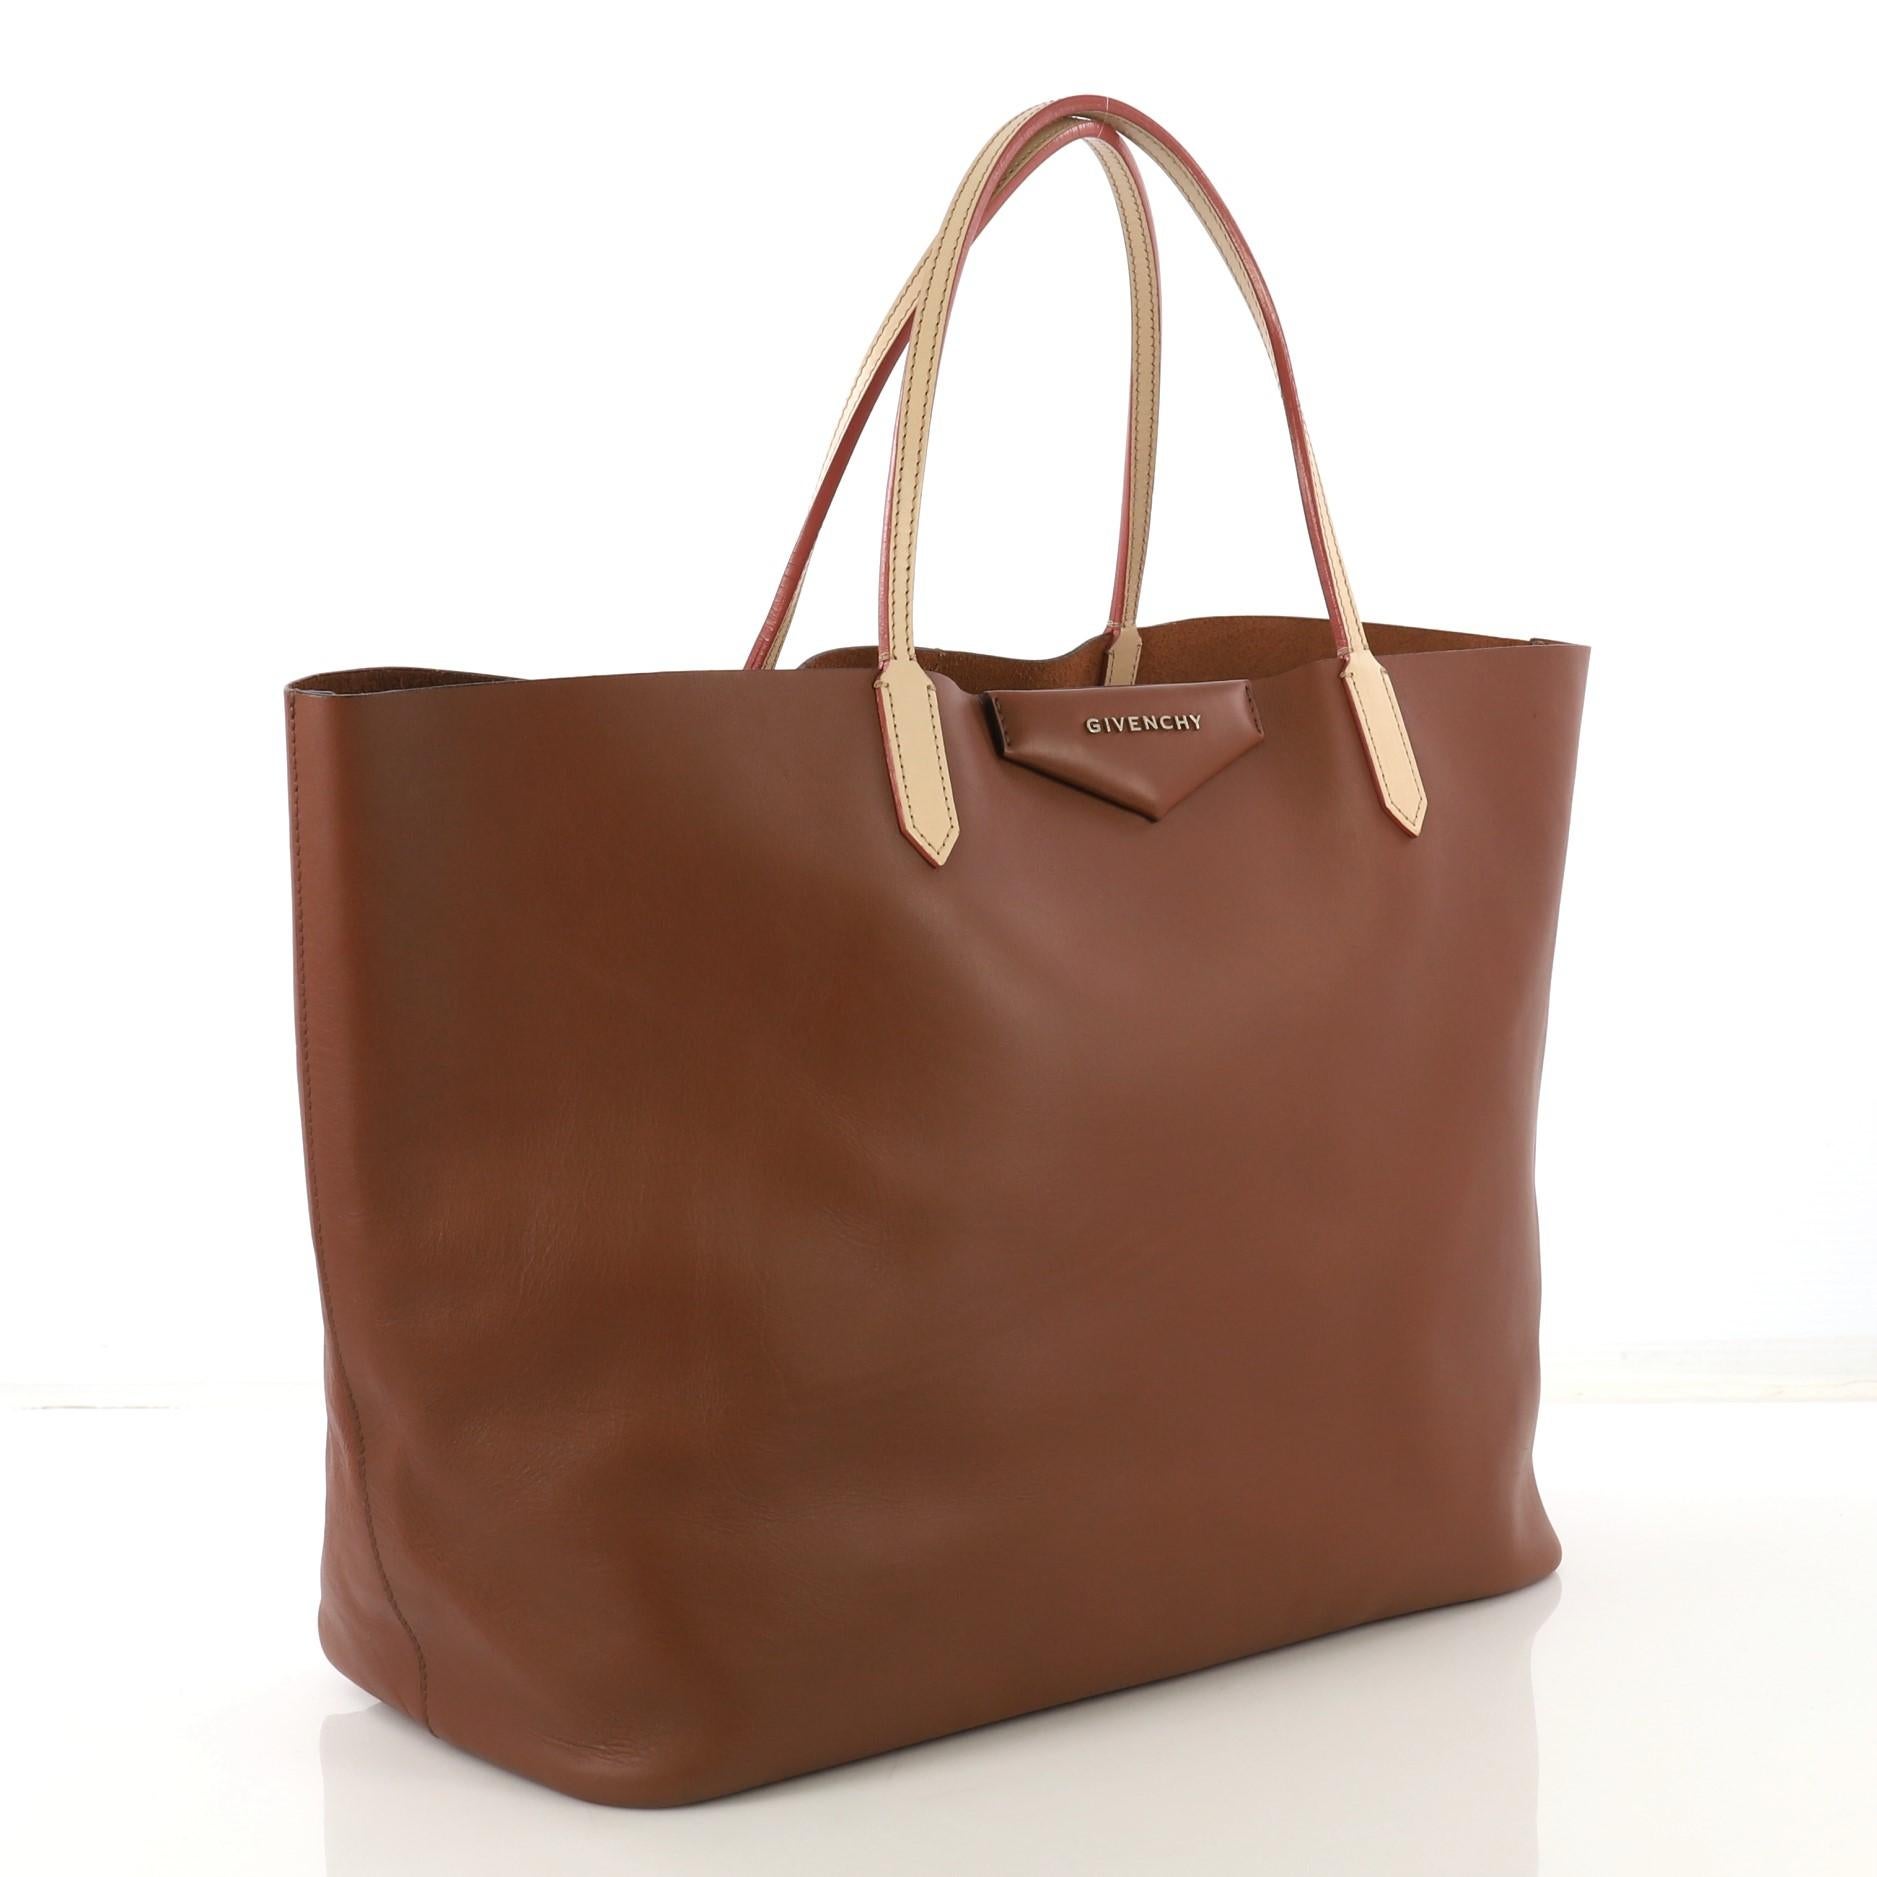 This Givenchy Antigona Shopper Leather Large, crafted in brown leather, features raised envelope fold logo, dual leather slim handles, and gold-tone hardware. Its wide open top opens to a brown raw leather interior. 

Estimated Retail Price: